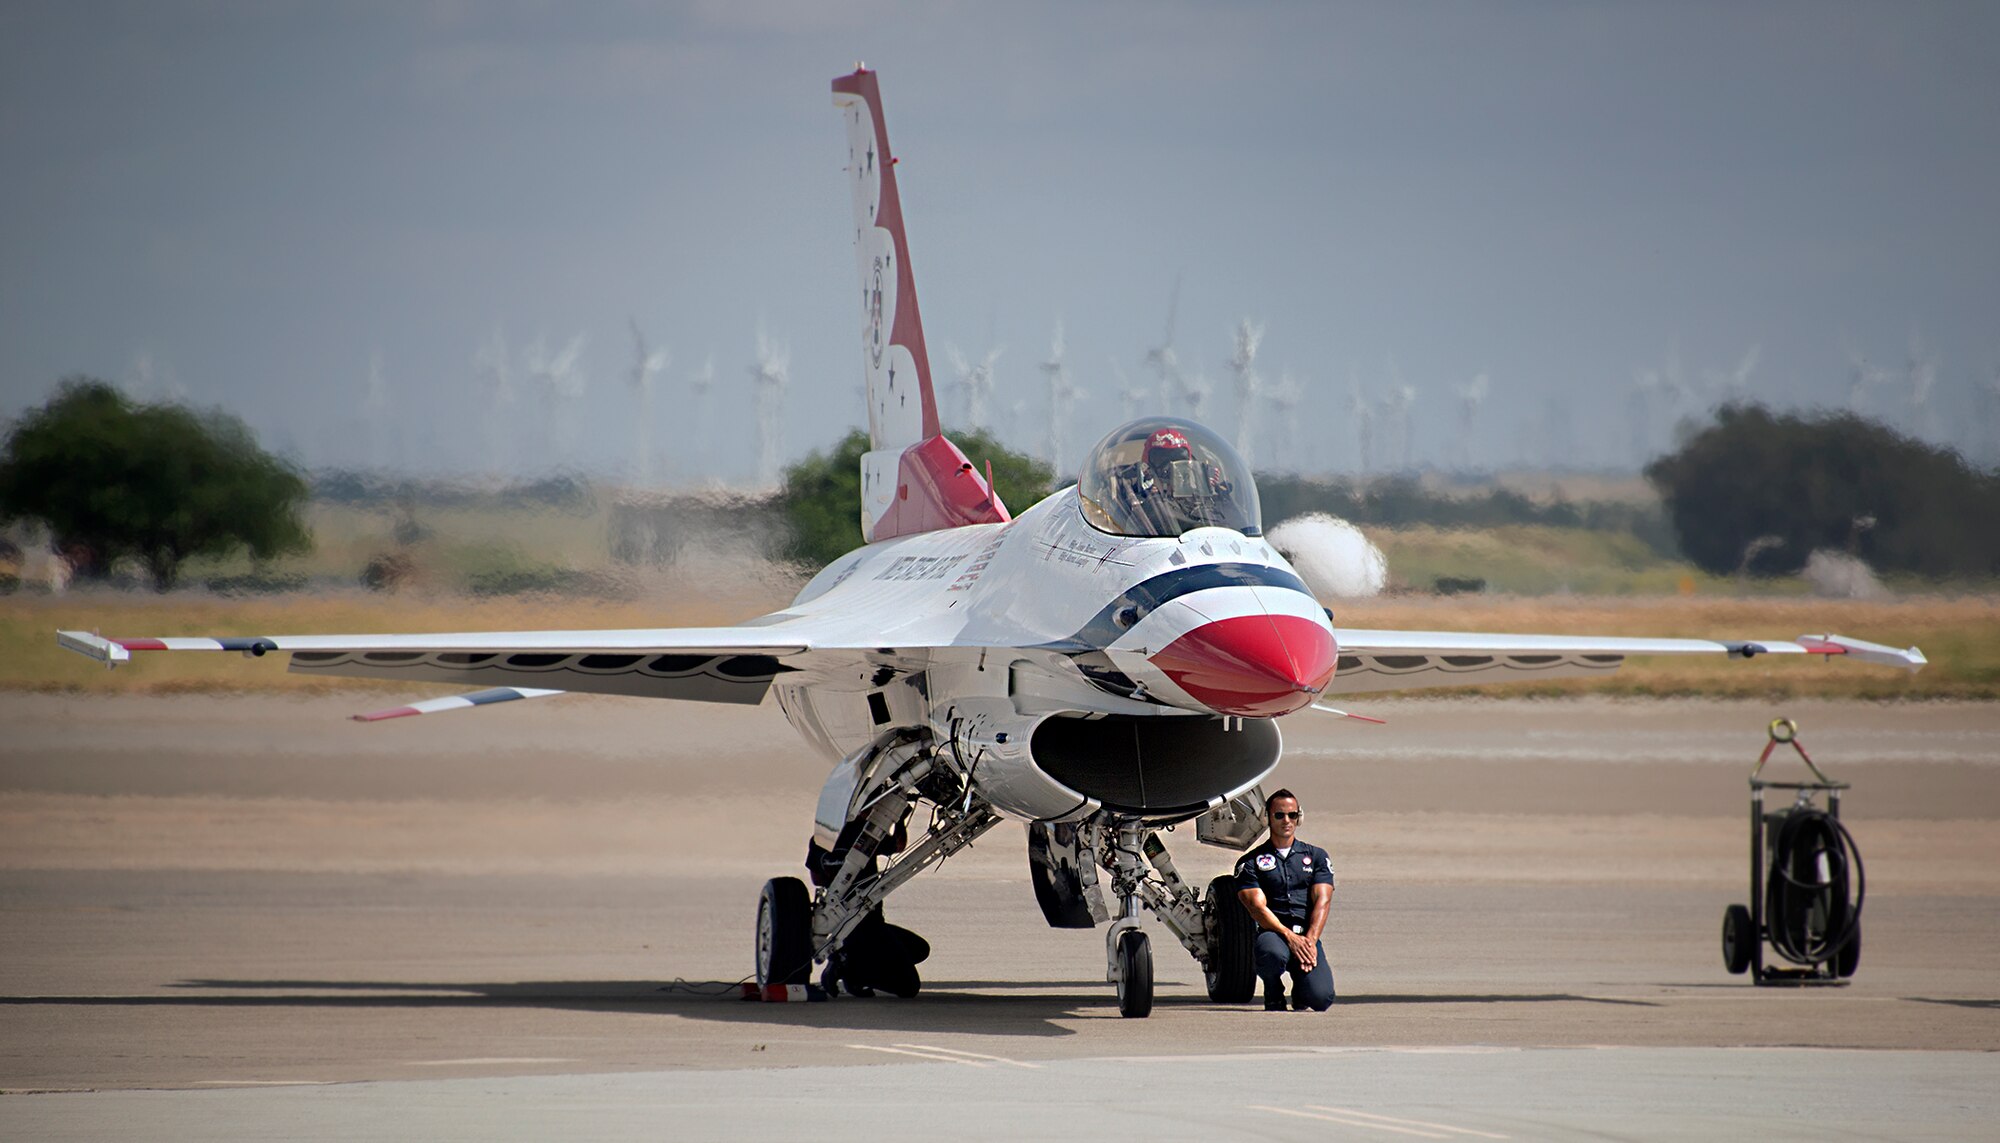 A U.S. Air Force Thunderbirds Aerial Demonstration Team F-16 Fighting Falcon waits to fly at in the Wings Over Solano Air Show at Travis Air Force Base, Calif., May 6, 2017. The two day event featured performances by the Thunderbirds, the U.S. Air Force Academy Wings of Blue and U.S. Army Golden Knights parachute teams, as well as civilian acts. (U.S. Air Force  photo/T.C. Perkins Jr.)